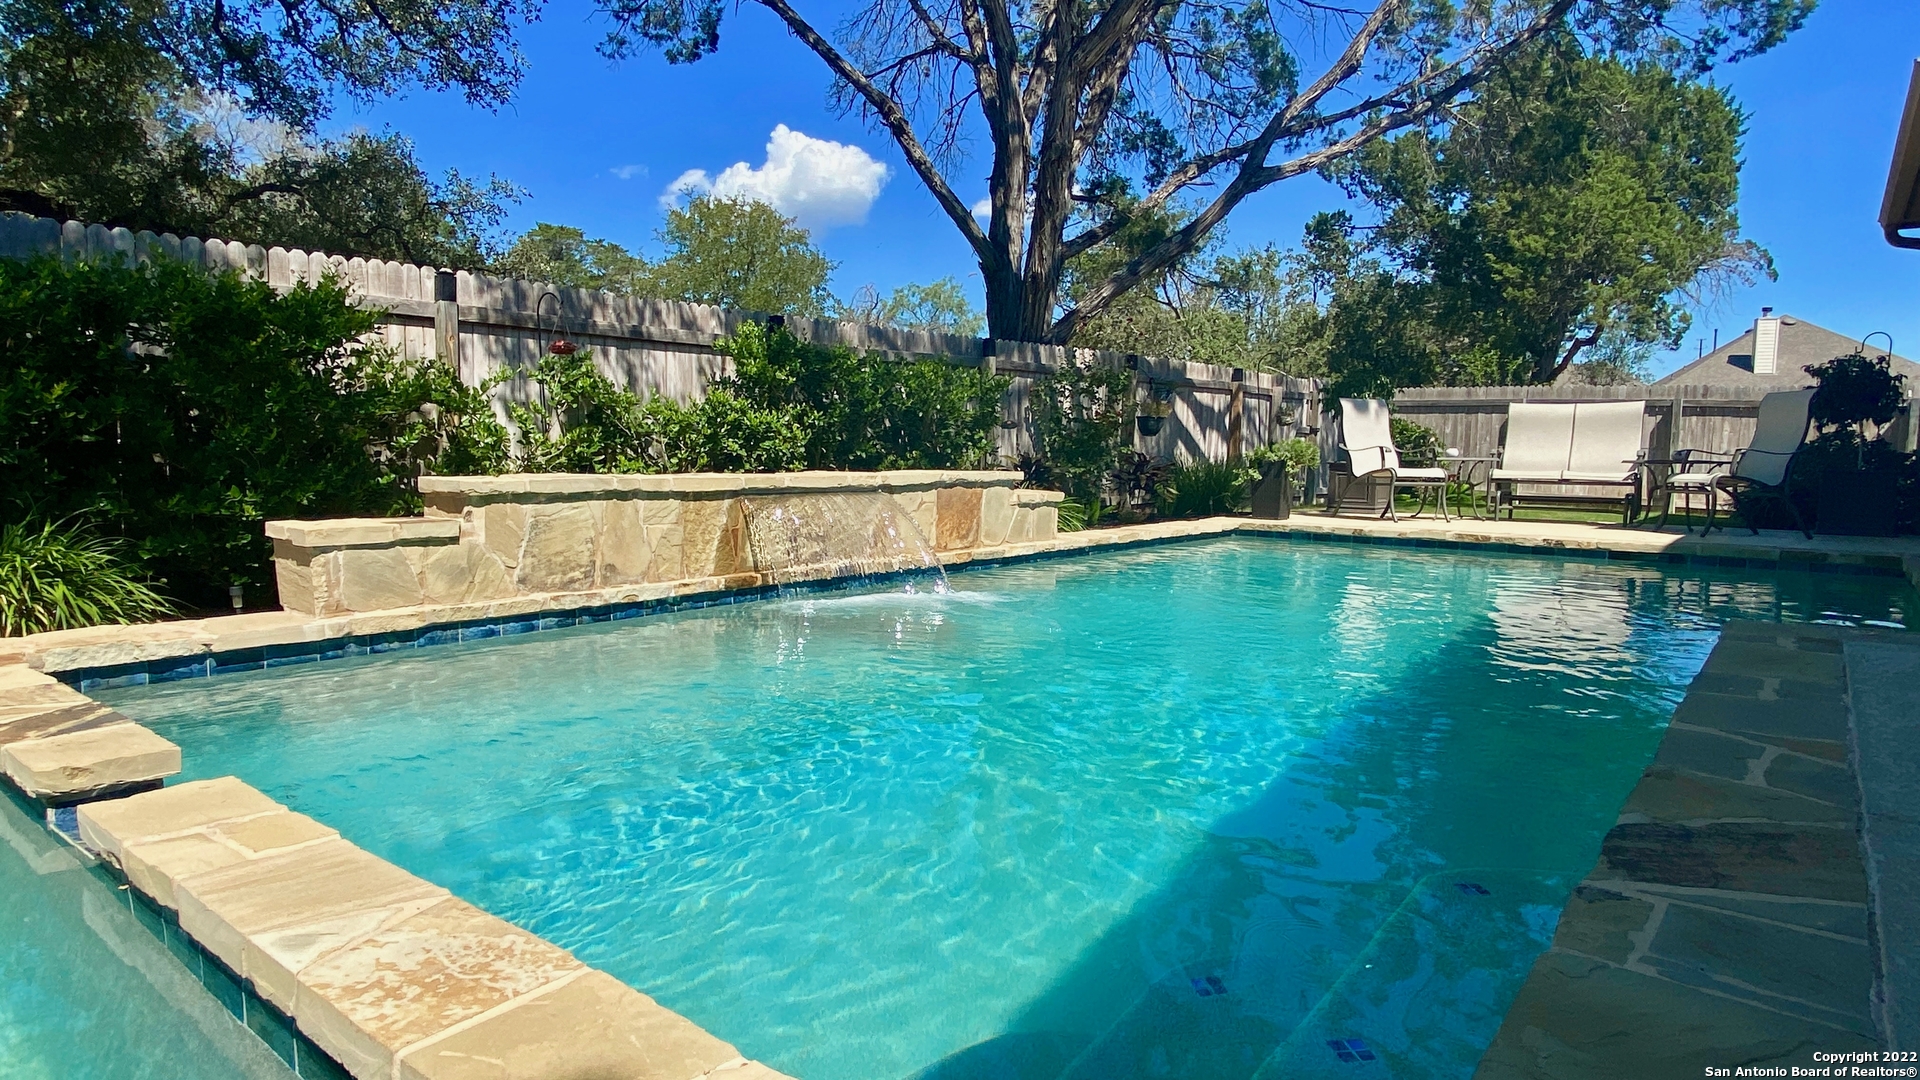 Enjoy the POOL/SPA in your private backyard oasis while listening to the outdoor sounds of the "Gruene Scene"! This beautiful home is in pristine condition on a great lot, approx 2829 sqft, 3 /2.5/ 2.5 with additional flex space that could be a great office. The 12-foot ceilings and 8 ft doors make this home so open with a view that goes straight to the patio and pool from the front door. The kitchen has a gas cooktop, an oversized granite island, and extended dining with additional conversation seating. The Master has a generous walk-in closet, and the master bath is amazing. They also have upgraded wood floors throughout. Did I say No carpet? This home is a short walks/golf cart ride to Gruene for music and dining It's also walking distance to the Guadalupe river, downtown New Braunfels, Farmer's Market, tubing on the Comal, golf, dining, and Wurstfest. The home is located outside of the city limits with a current low tax rate of 1.62